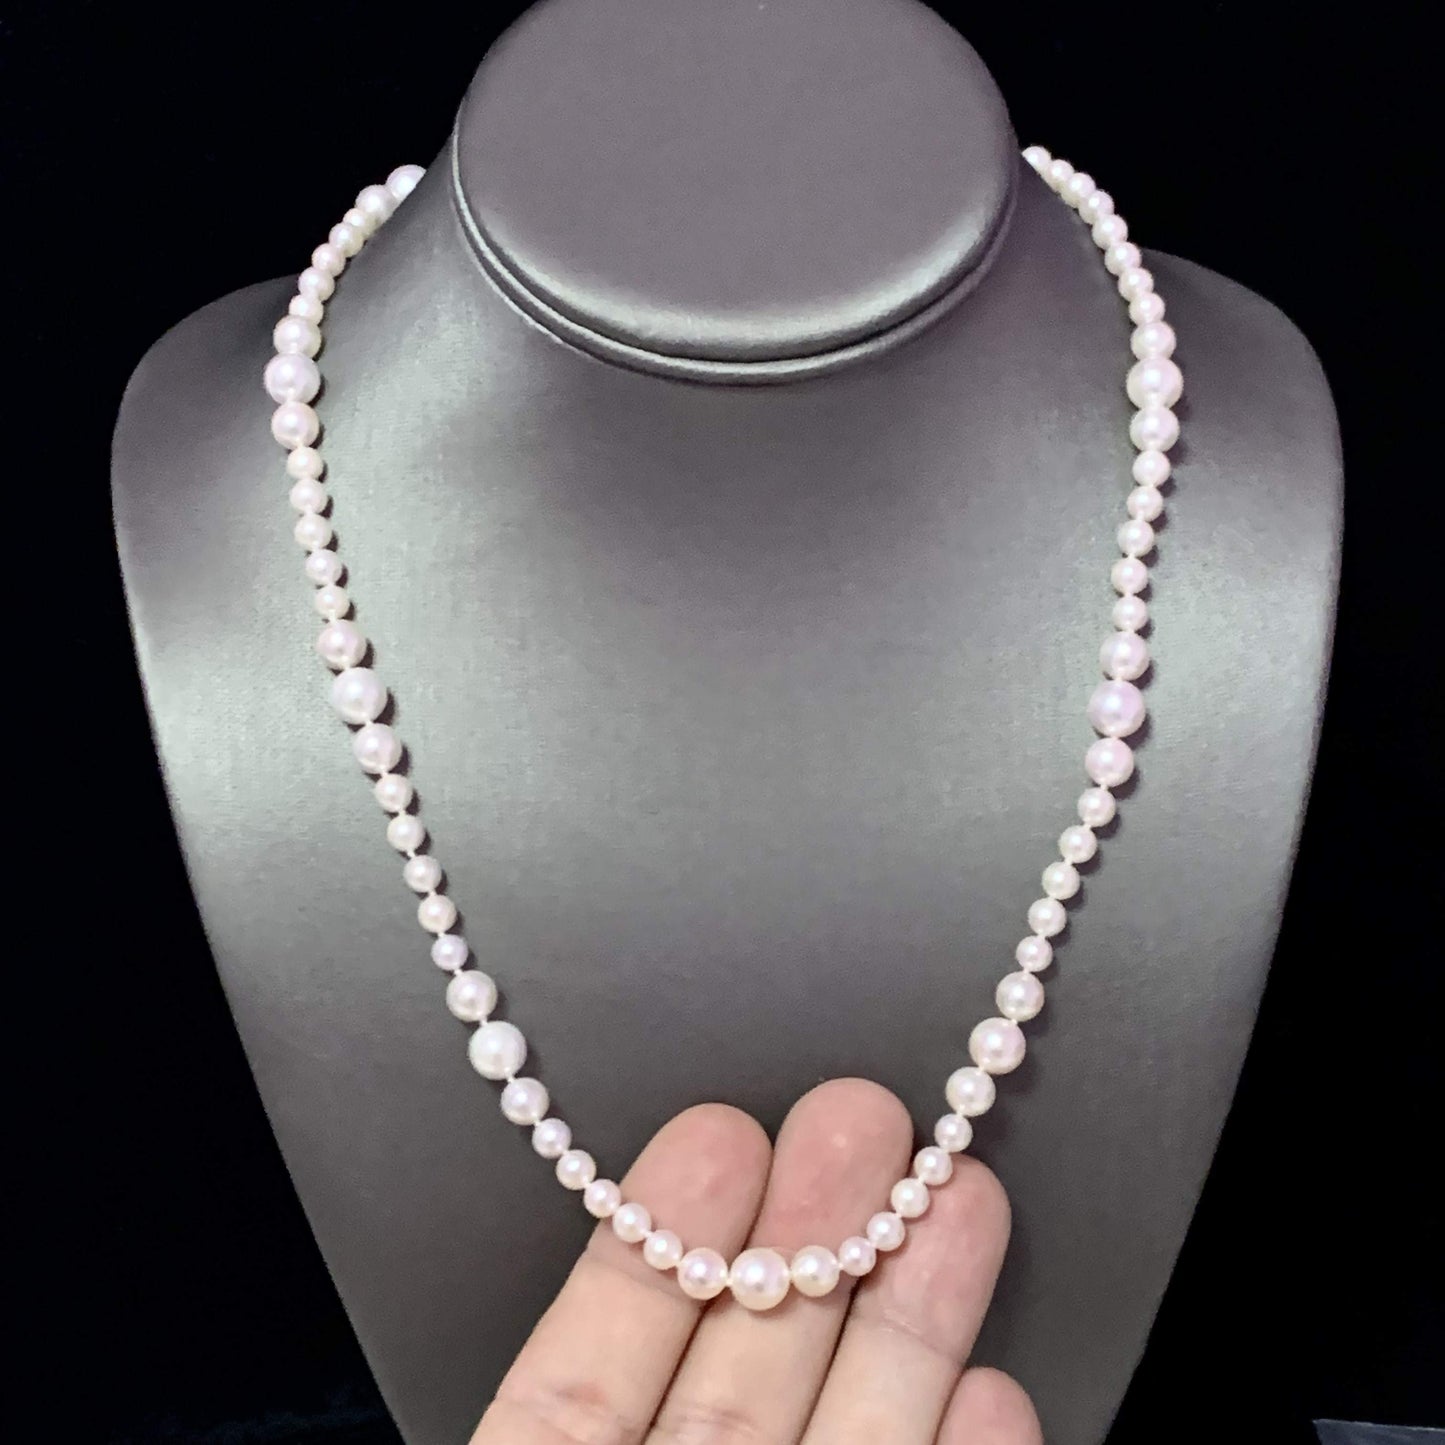 Akoya Pearl Necklace 14k Yellow Gold 19.5" 8.5 mm Certified $3,950 114446 - Certified Estate Jewelry